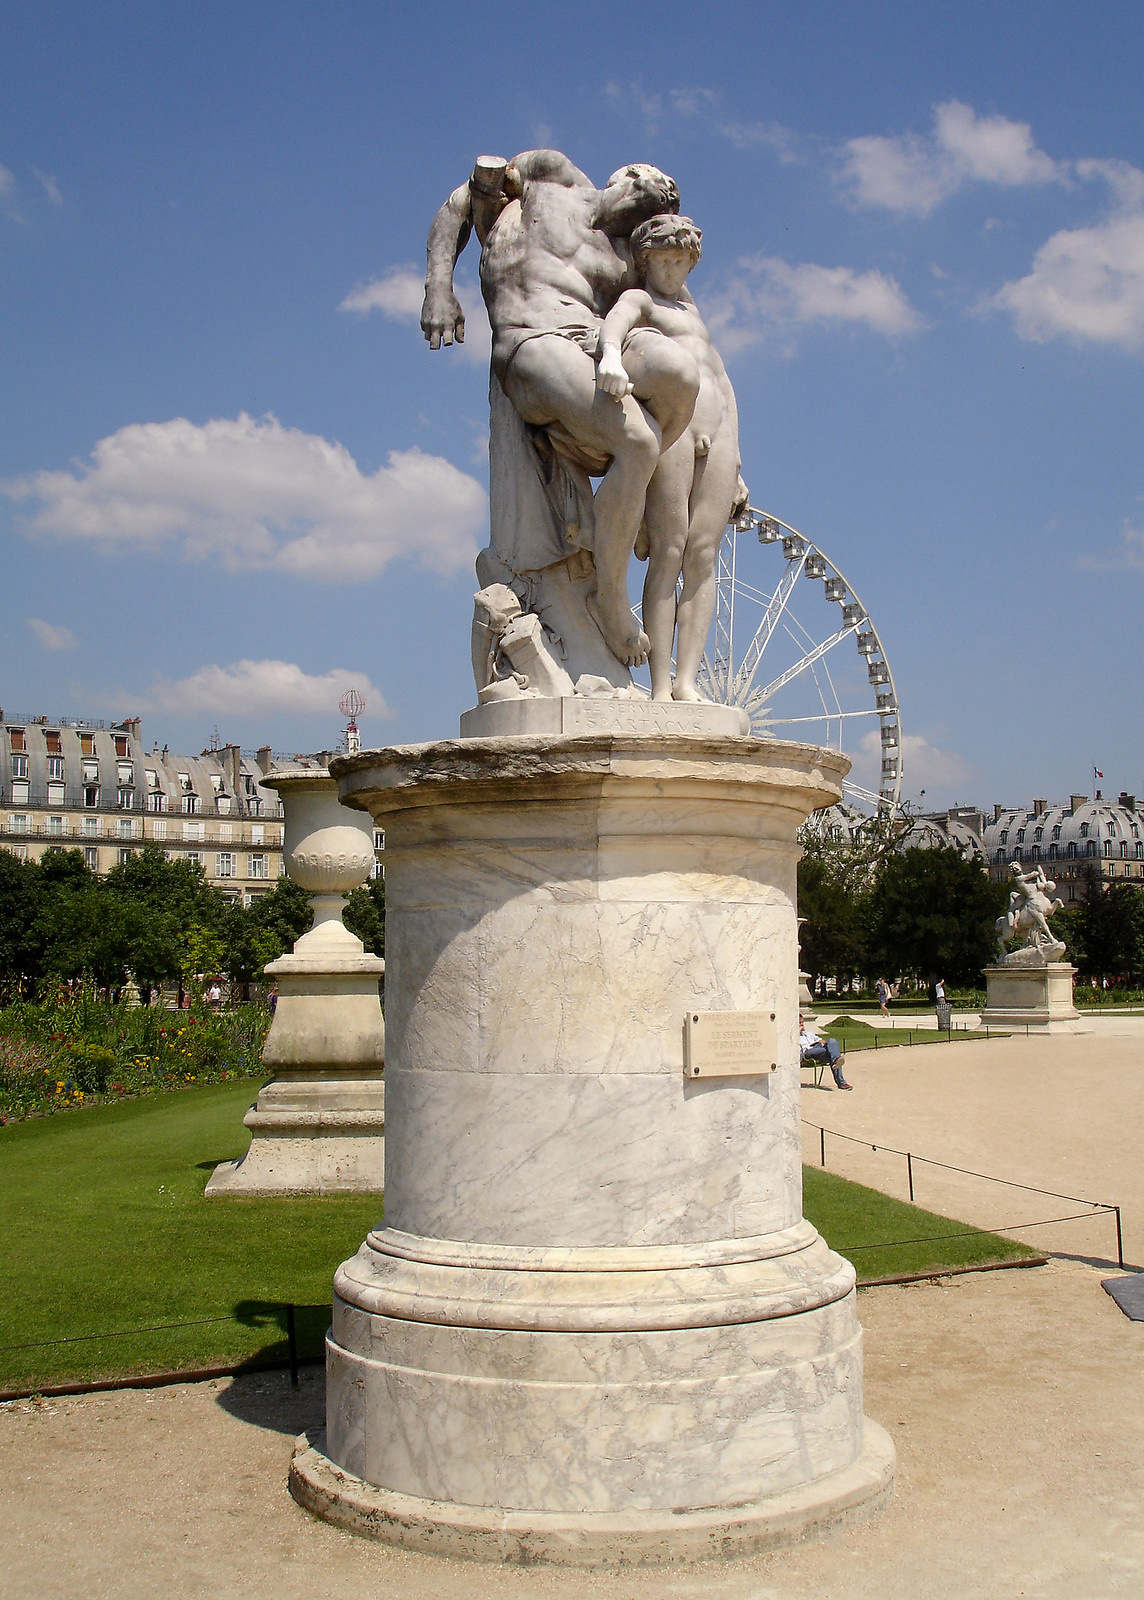 Marble statue in the Tuileries